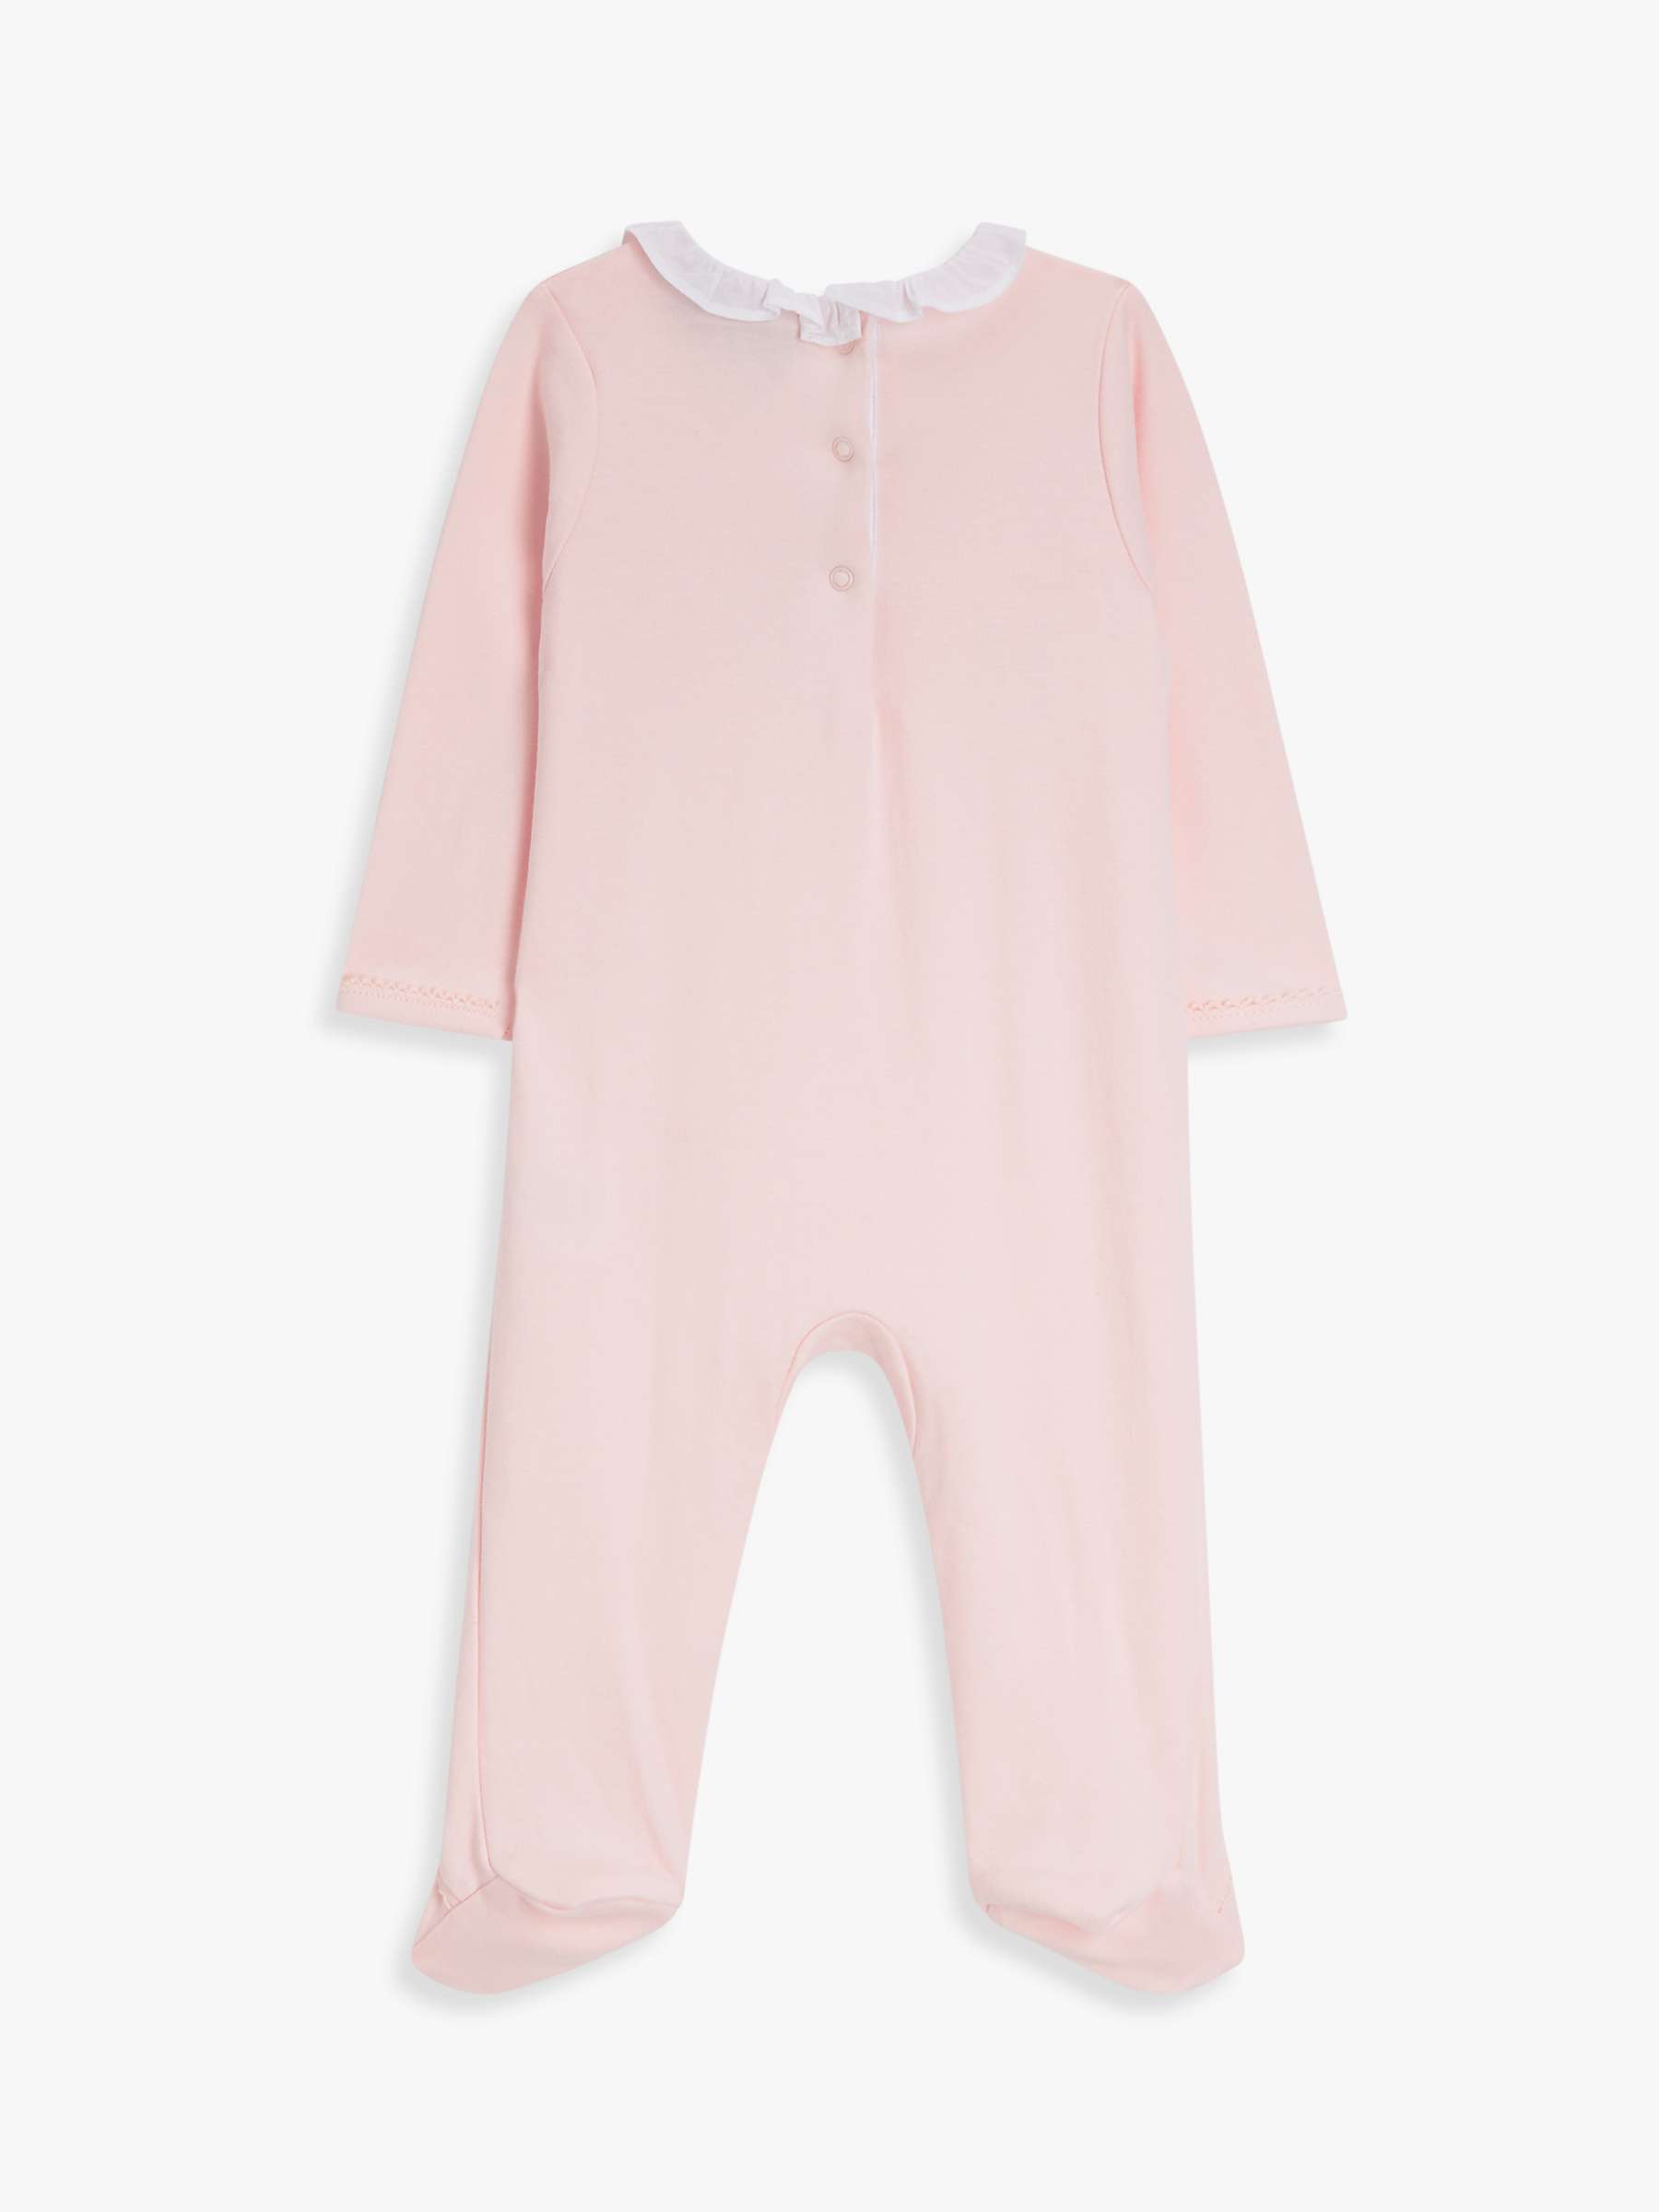 Buy John Lewis Heirloom Collection Baby Pima Cotton Frill Smocked Sleepsuit, Pink Online at johnlewis.com